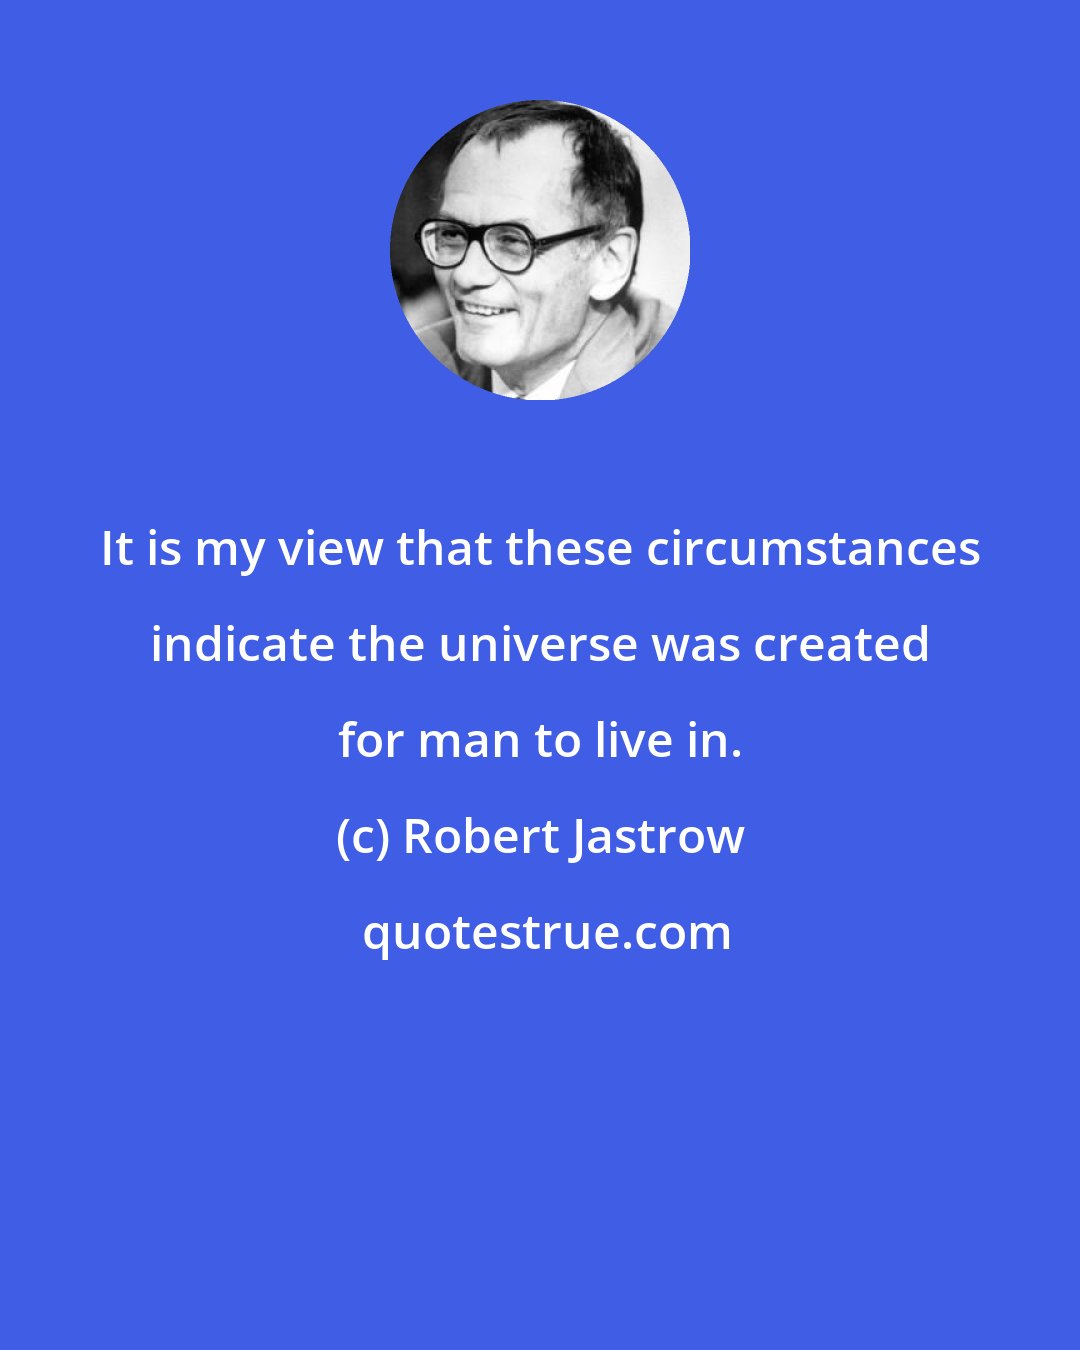 Robert Jastrow: It is my view that these circumstances indicate the universe was created for man to live in.